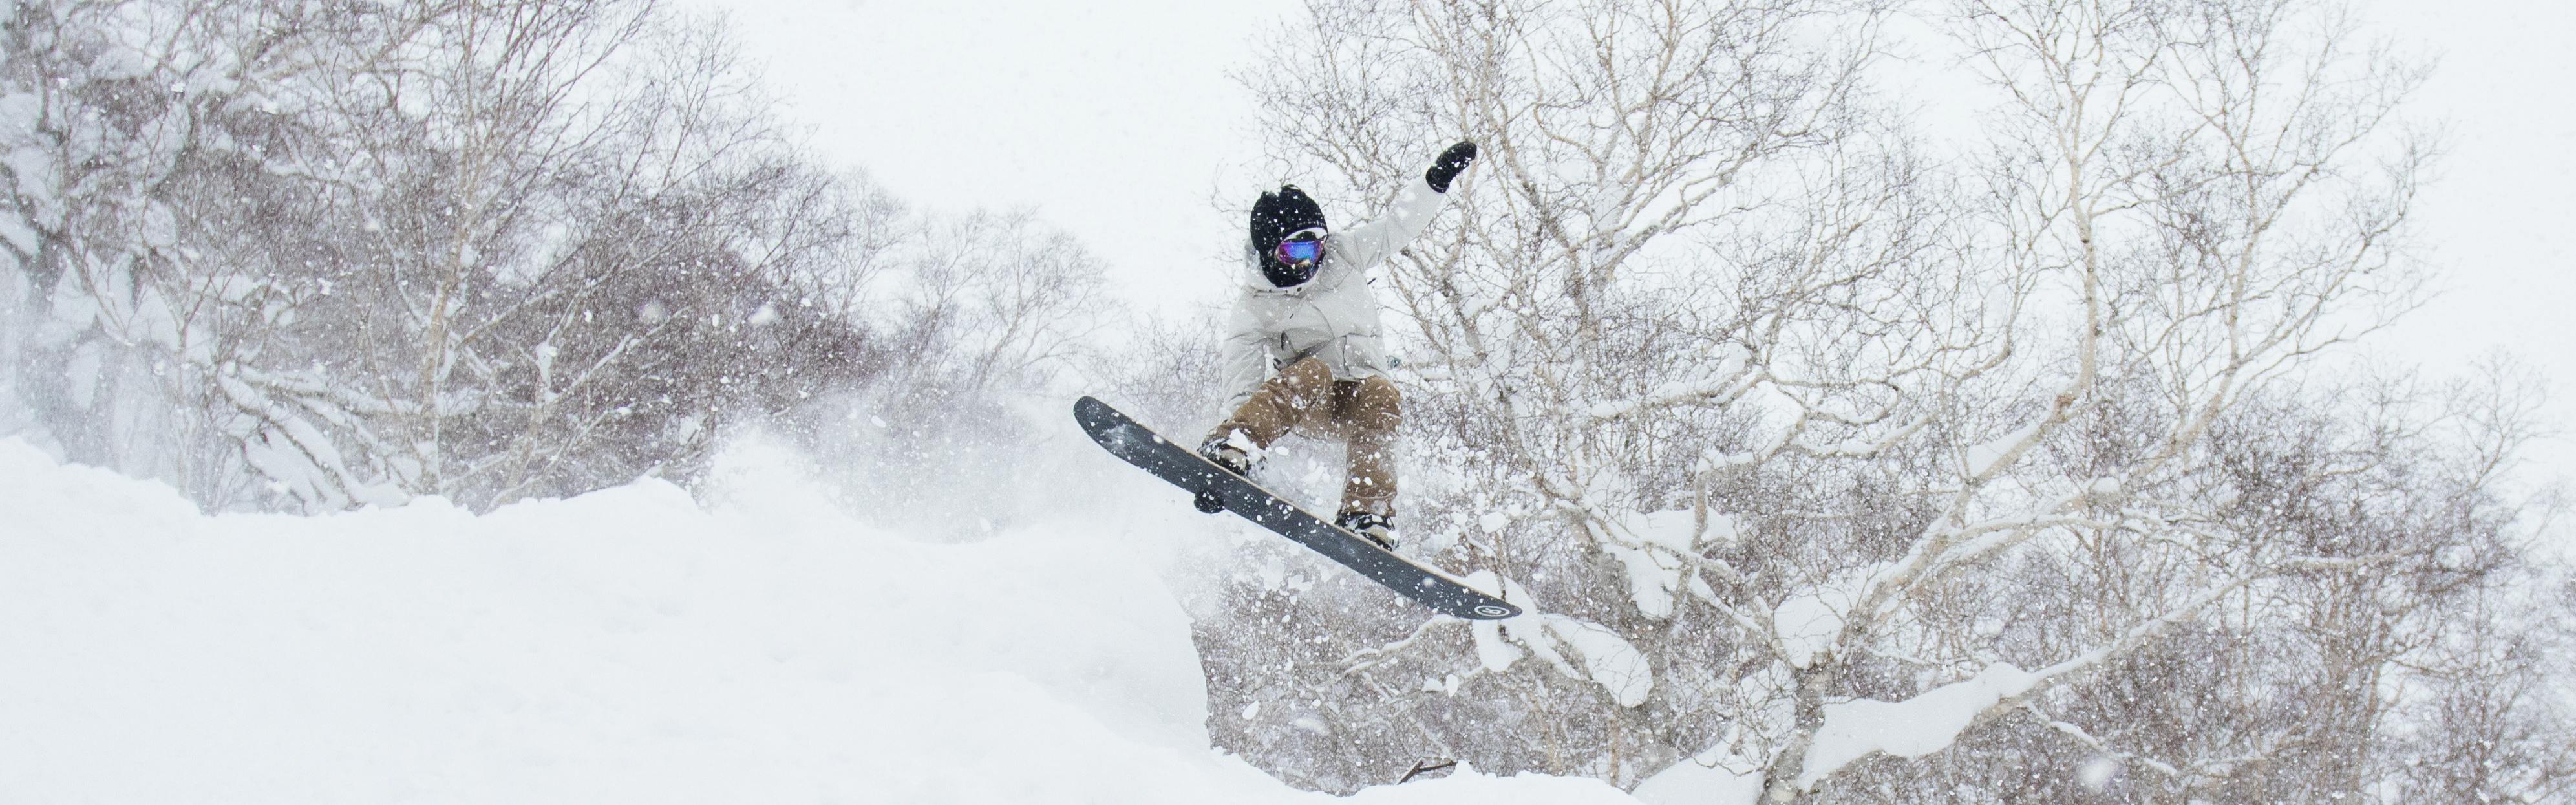 Someone jumps on a snowboard through the powder.